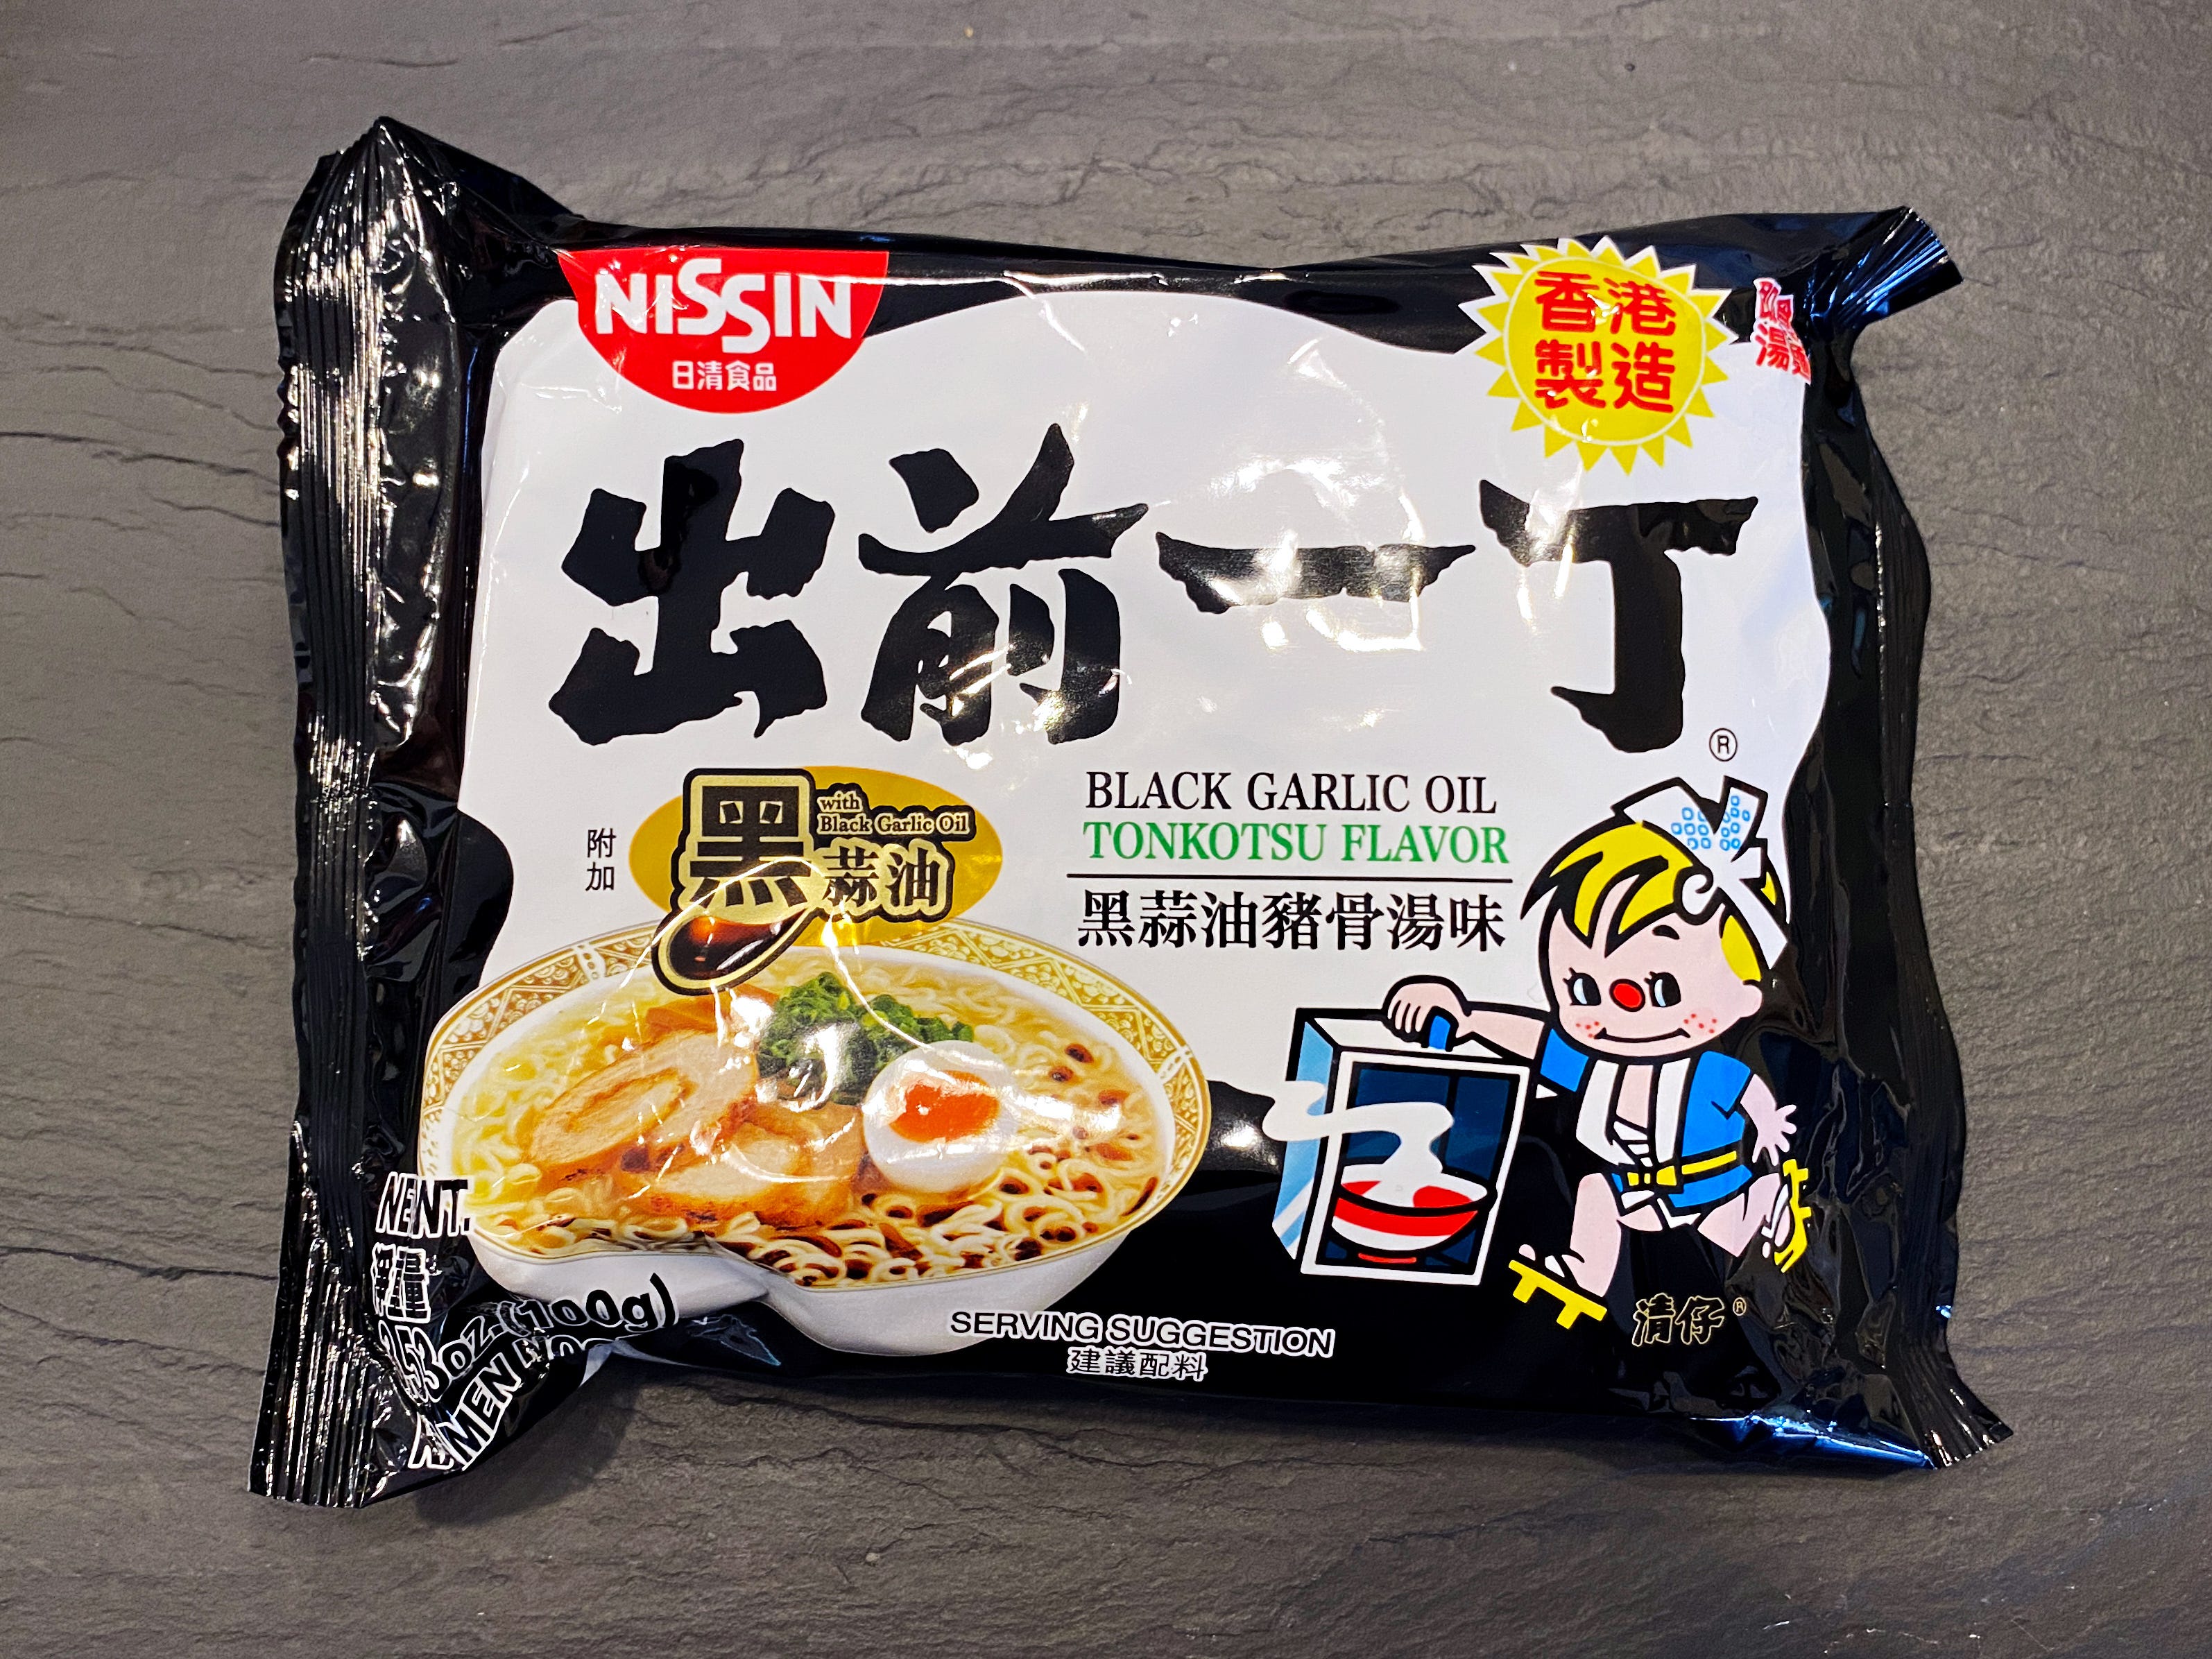 types of instant noodles and ramen, ranked from worst to best